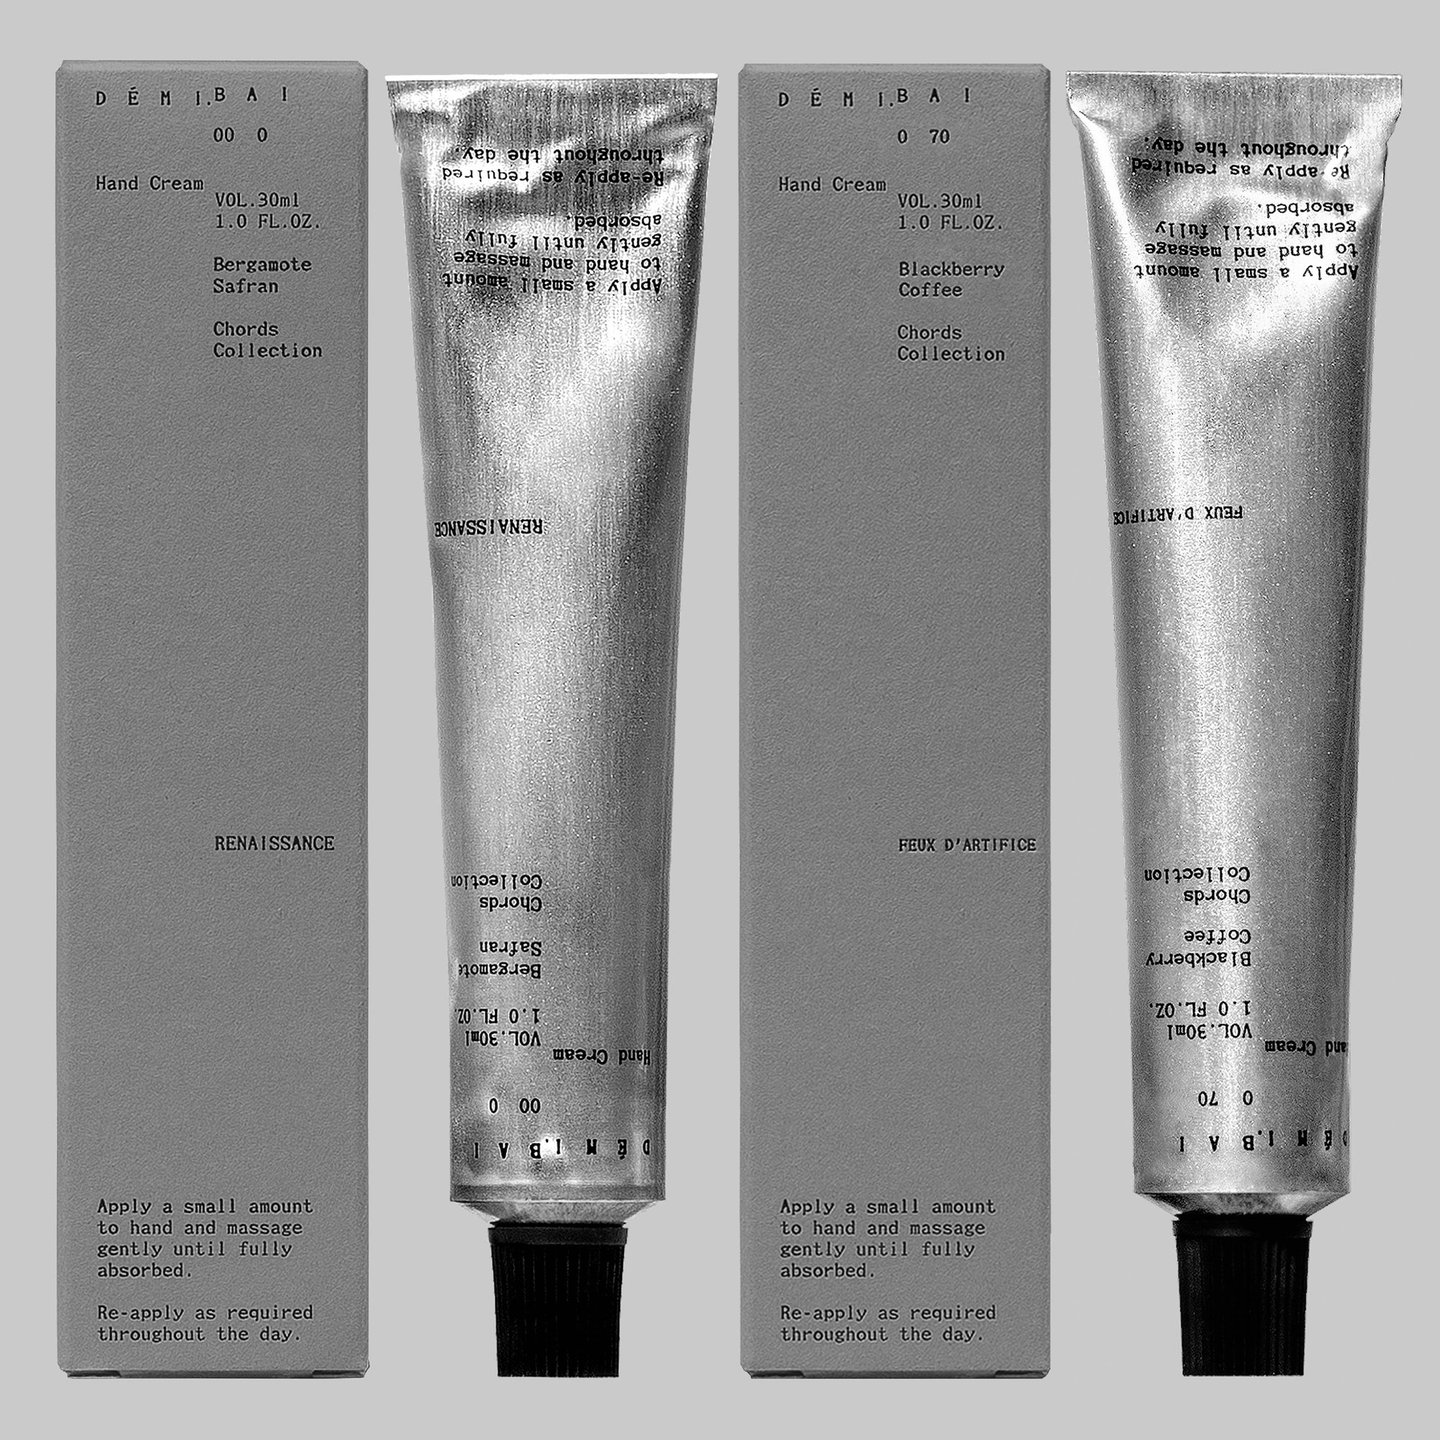 Resembling volcanic rock, this hand cream packaging looks even better after squeezing